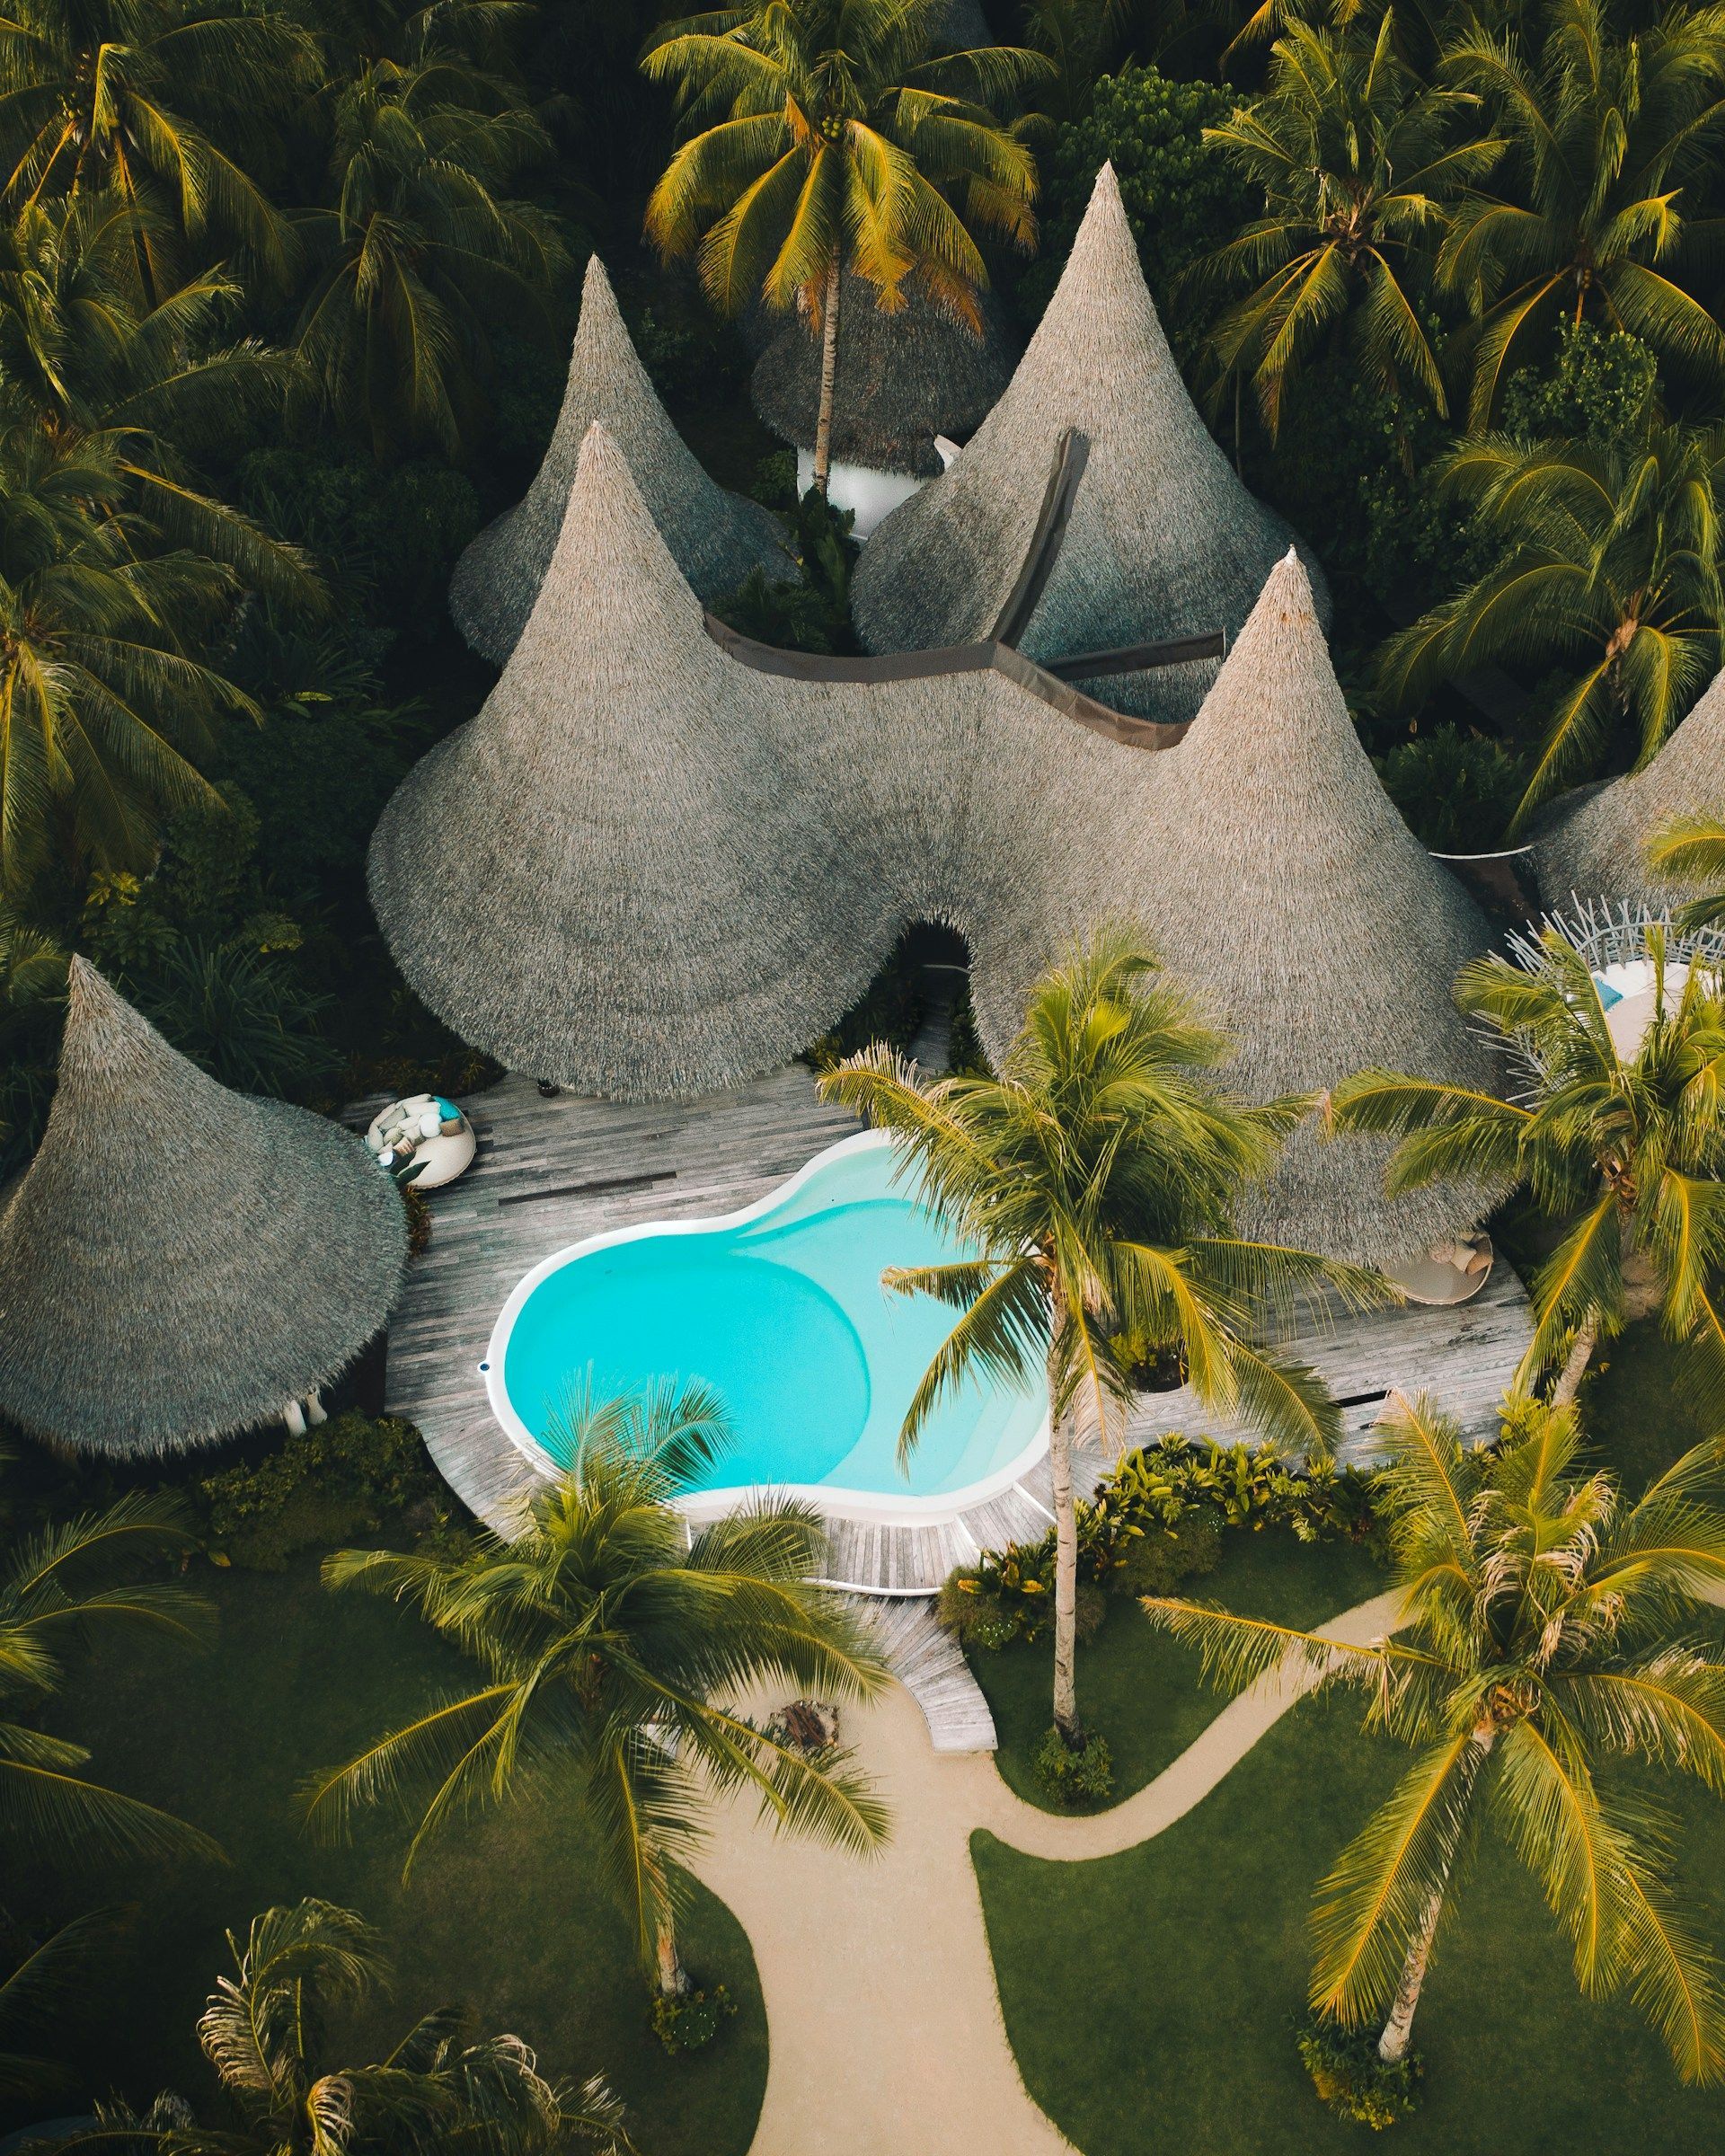 An aerial view of a swimming pool surrounded by palm trees